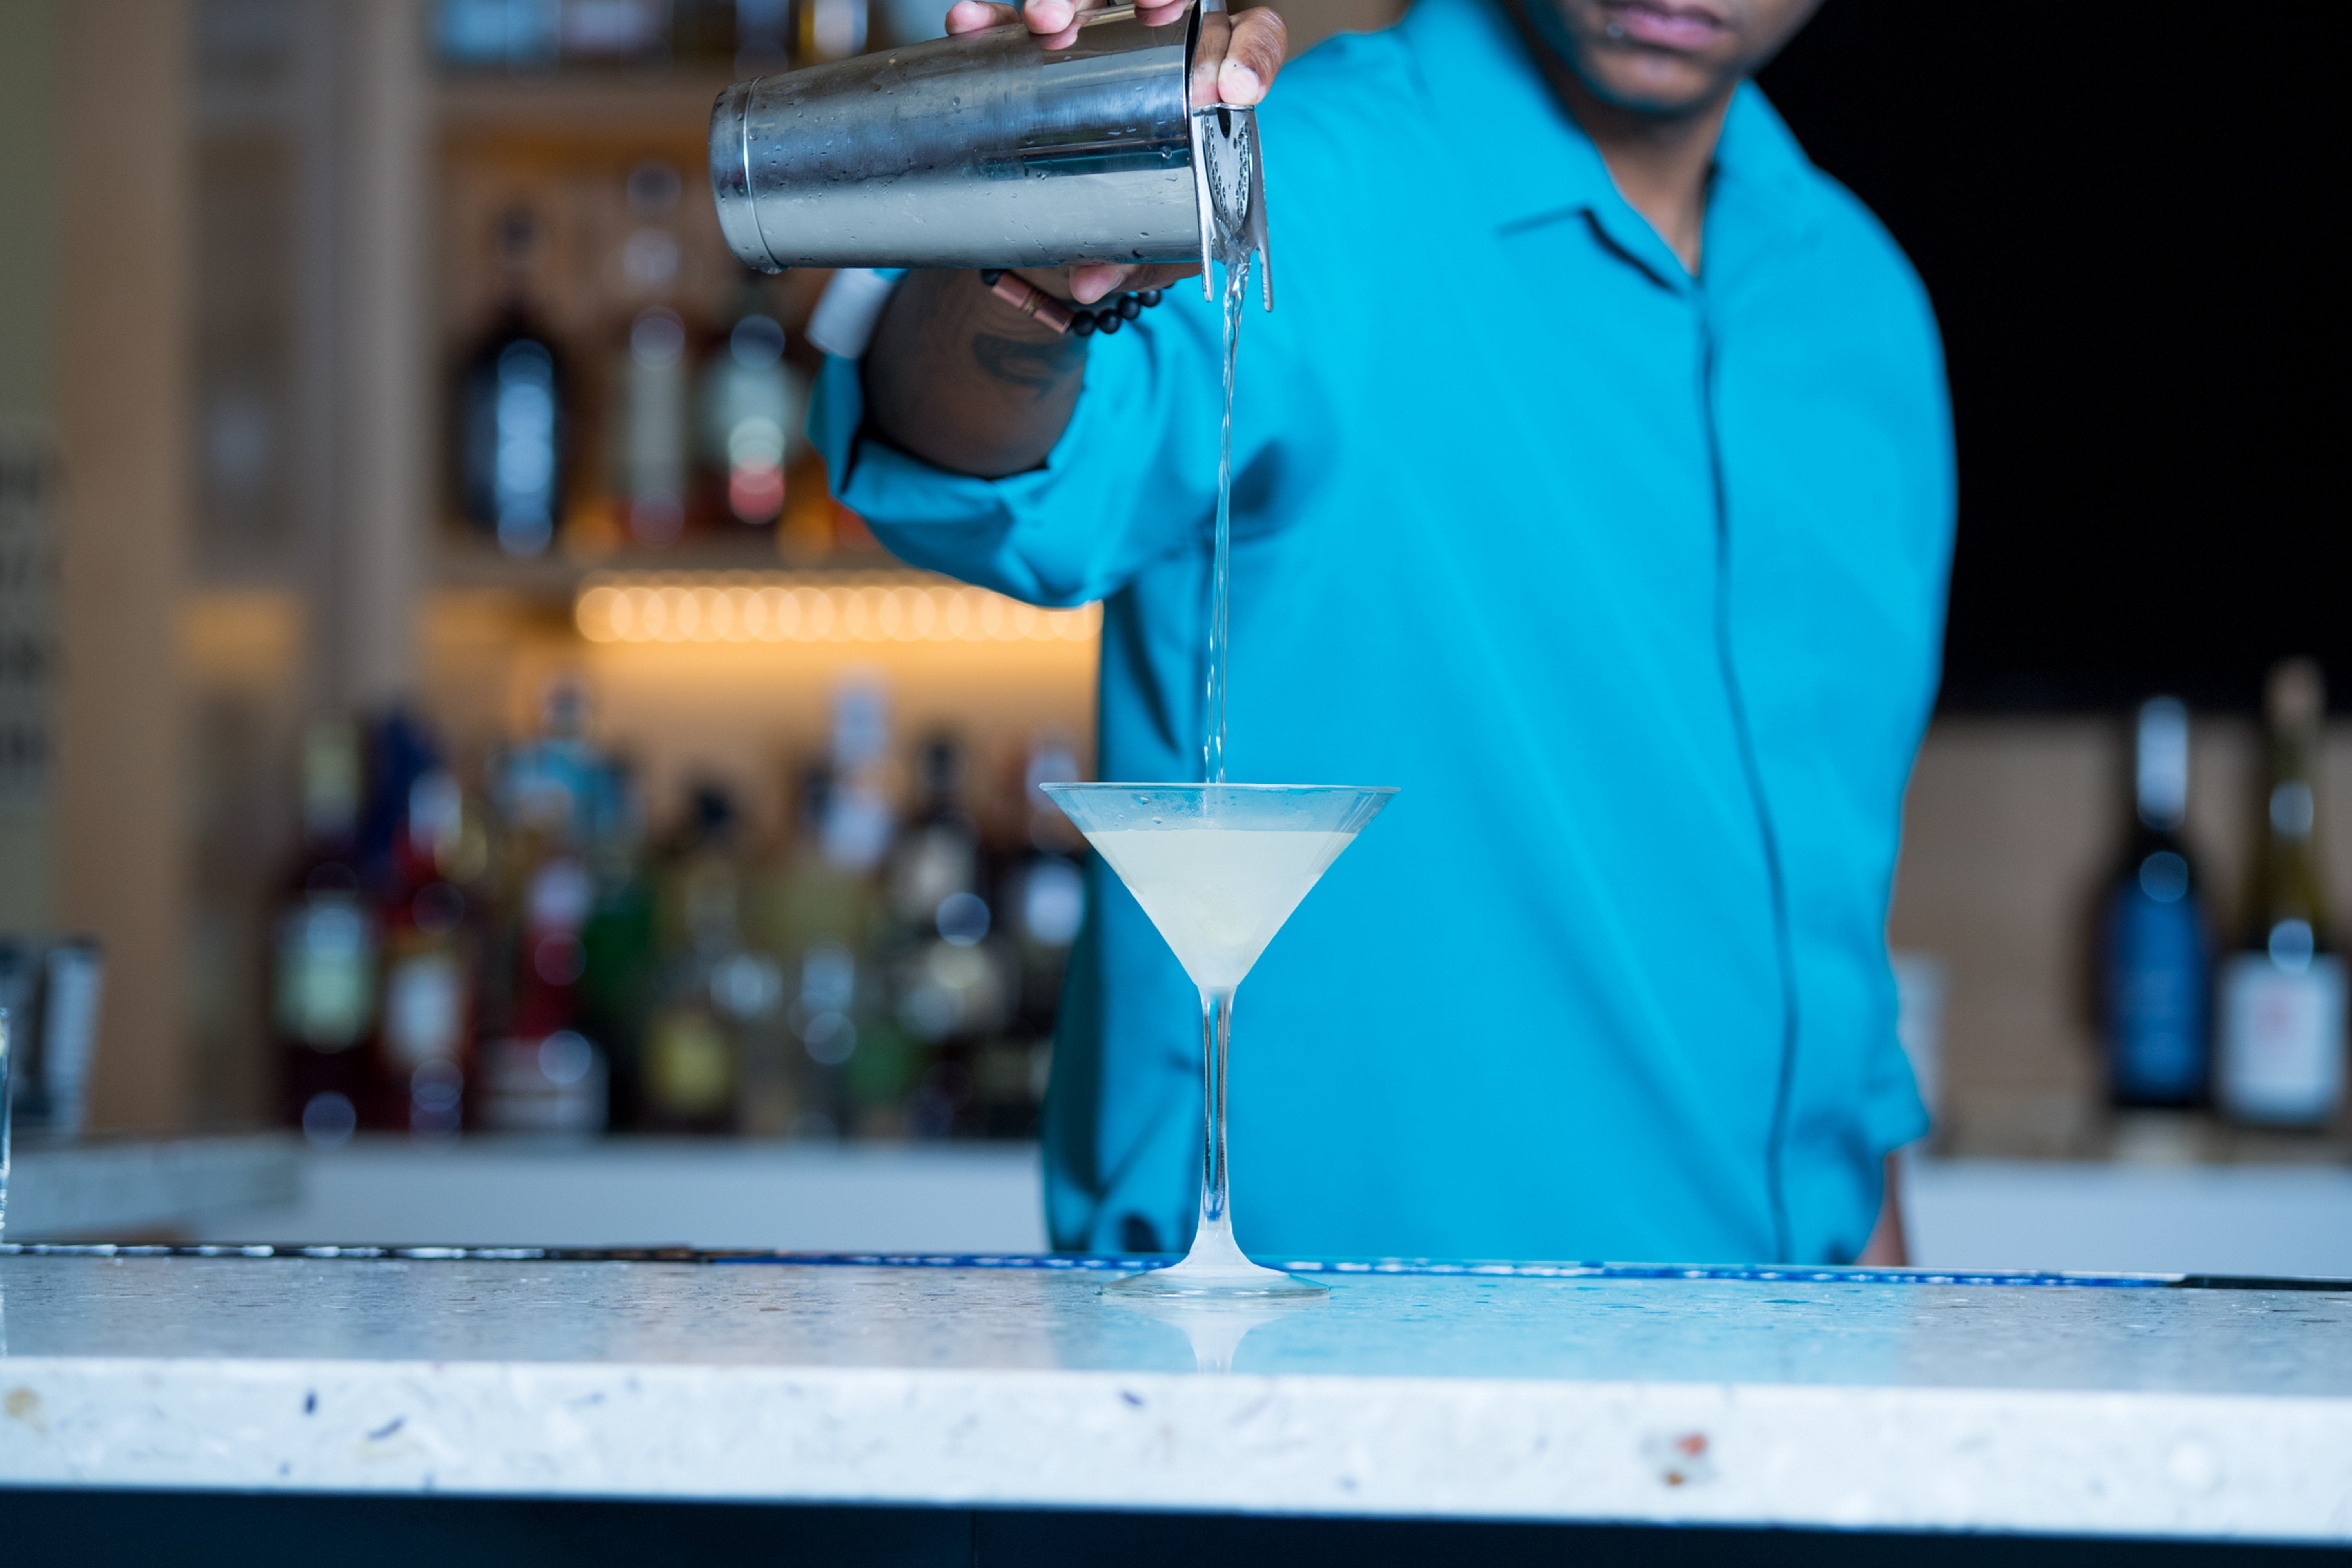 Enjoy a specialty cocktail during our happy hour in Hunter's Bend